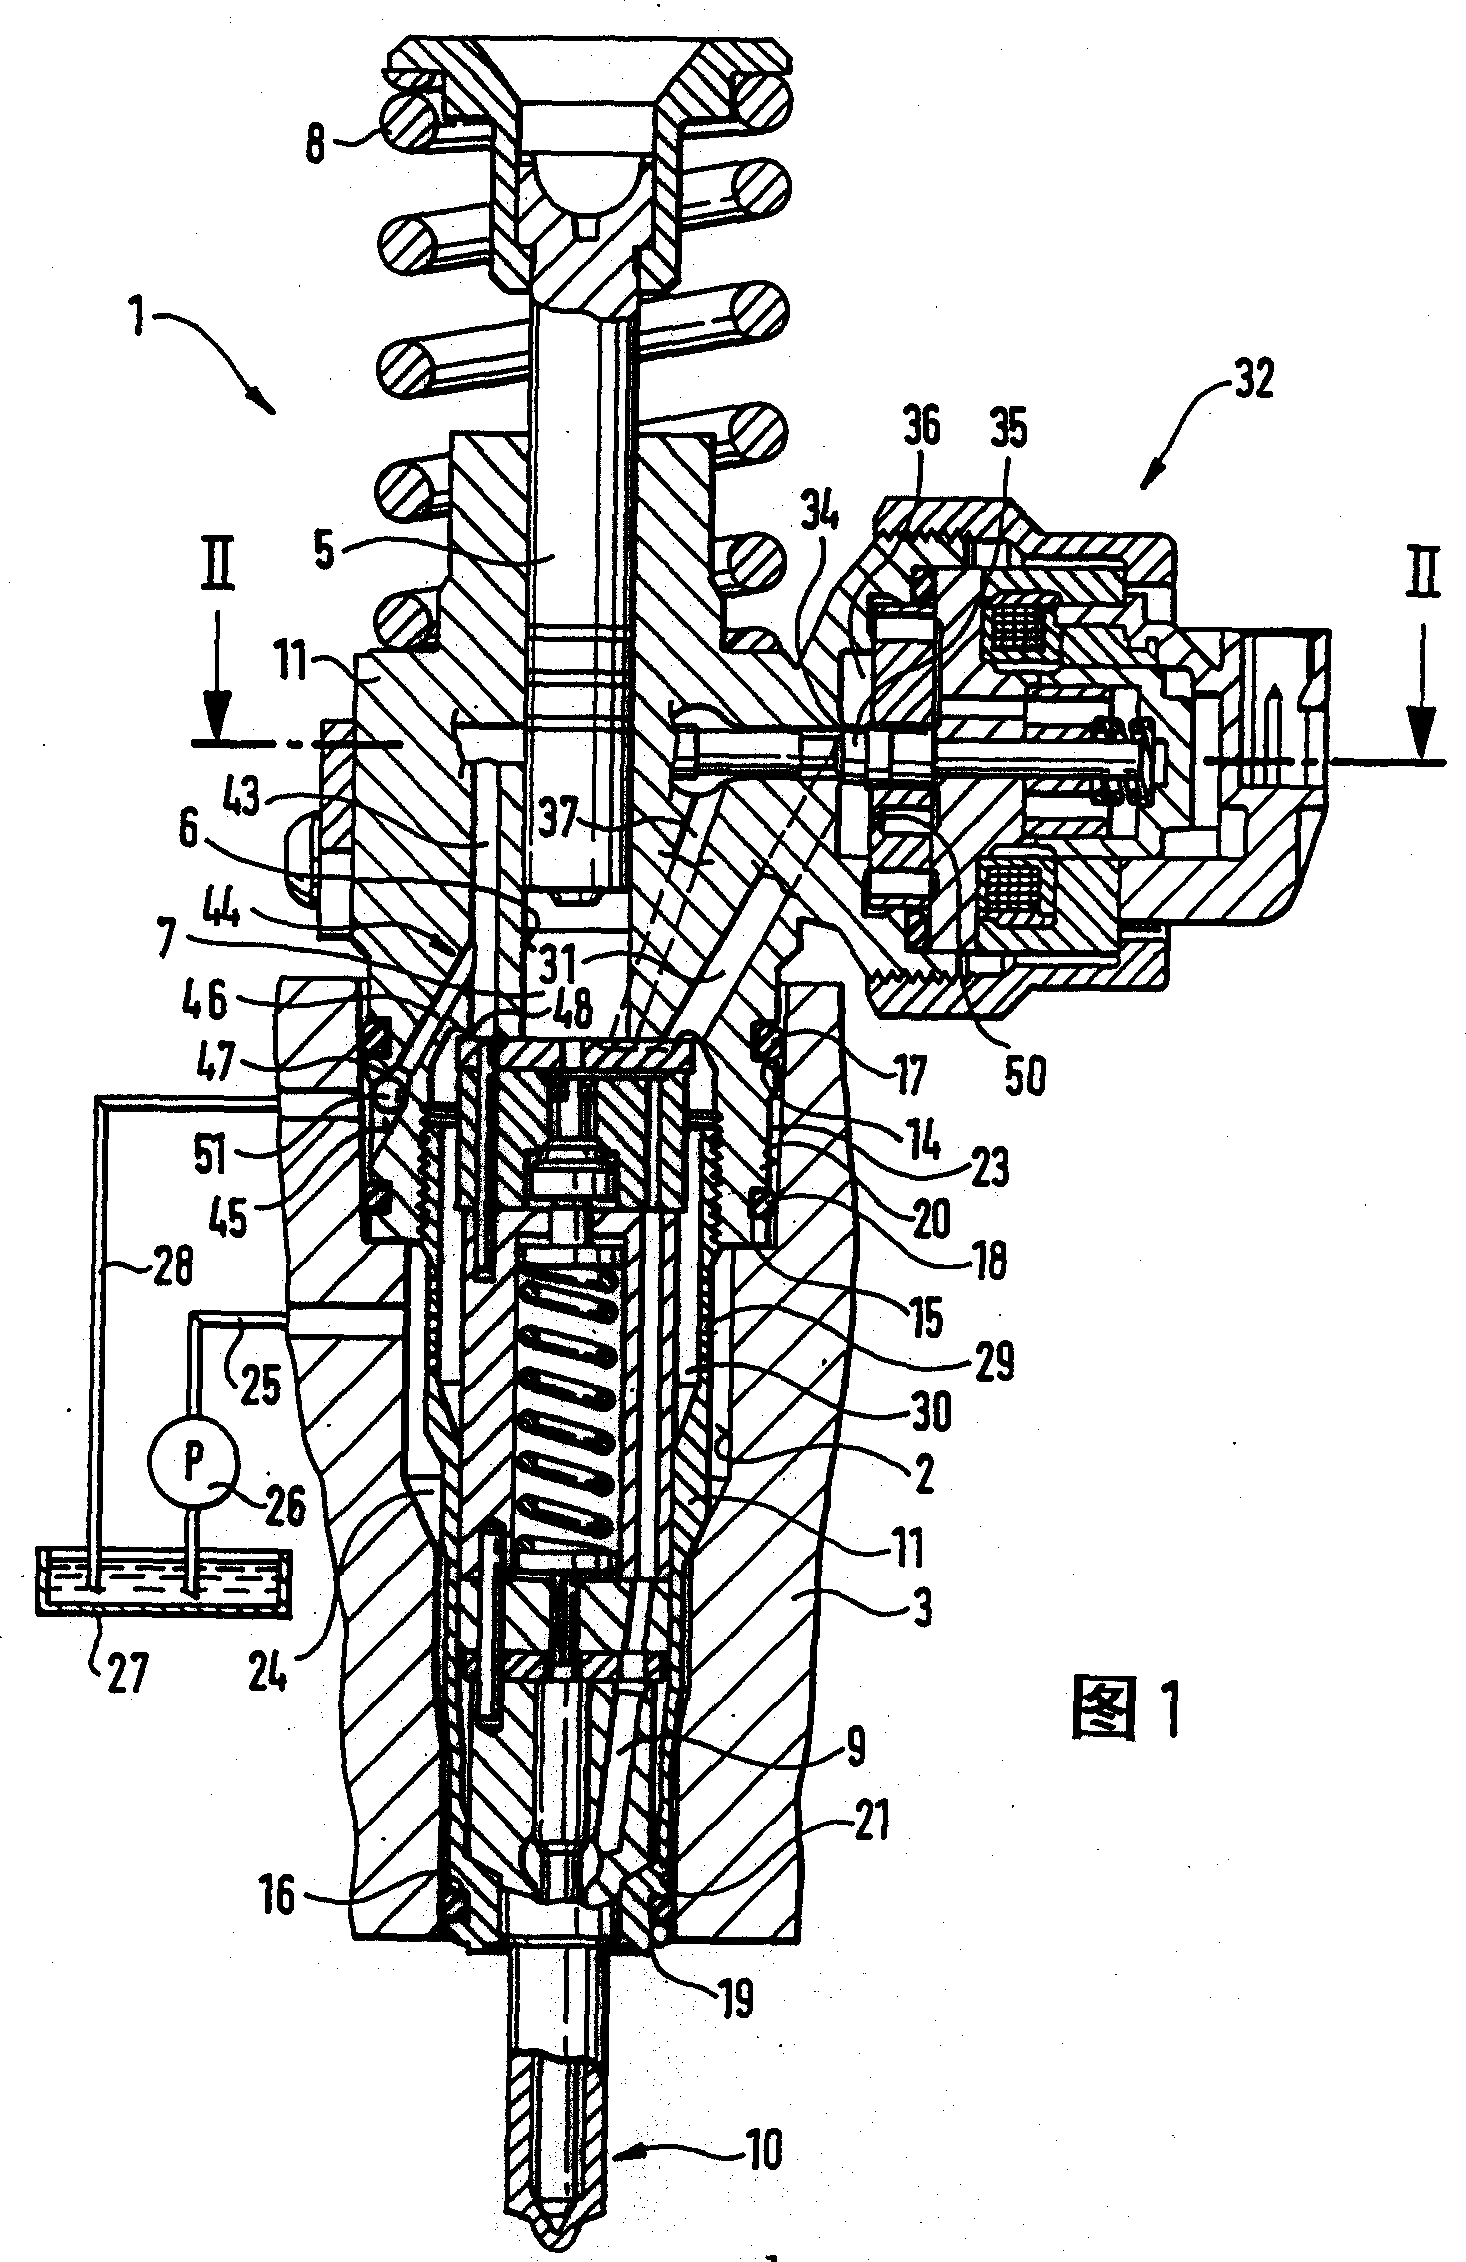 Seam test on a fuel injection pump, and fuel injection pump required for applying same